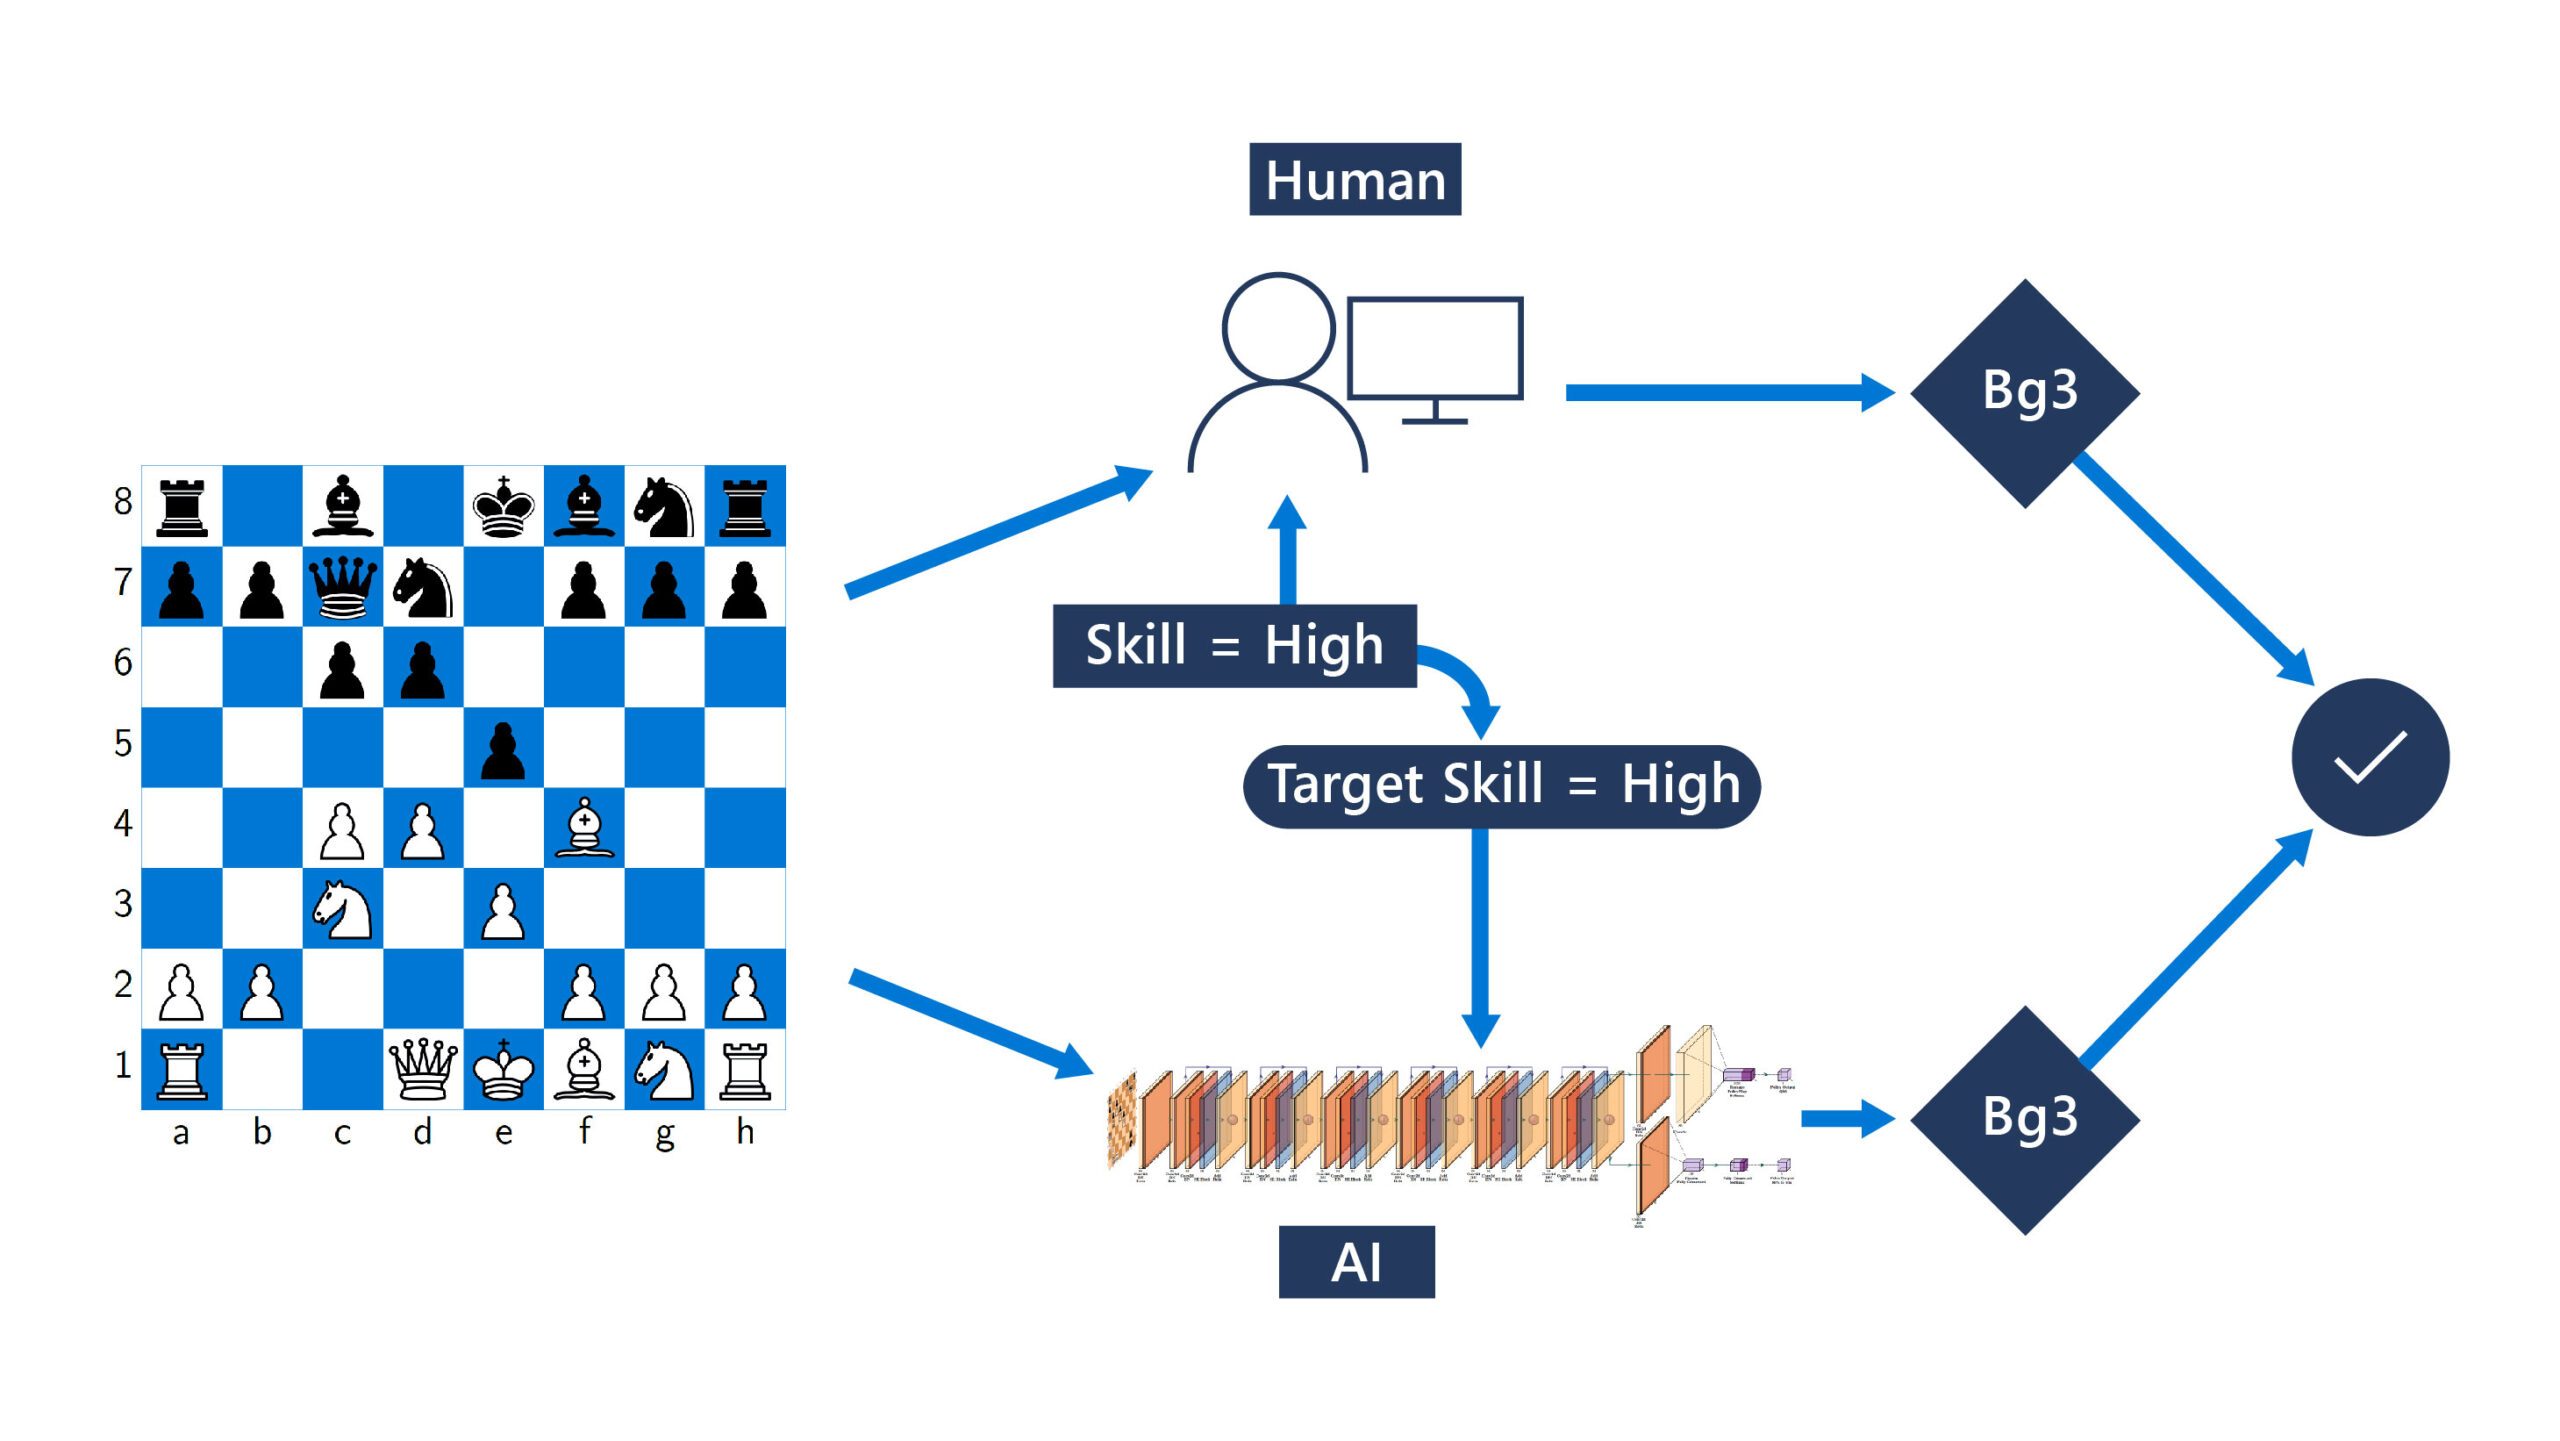 Chess.com leverages Semantics and automation with AppFollow to